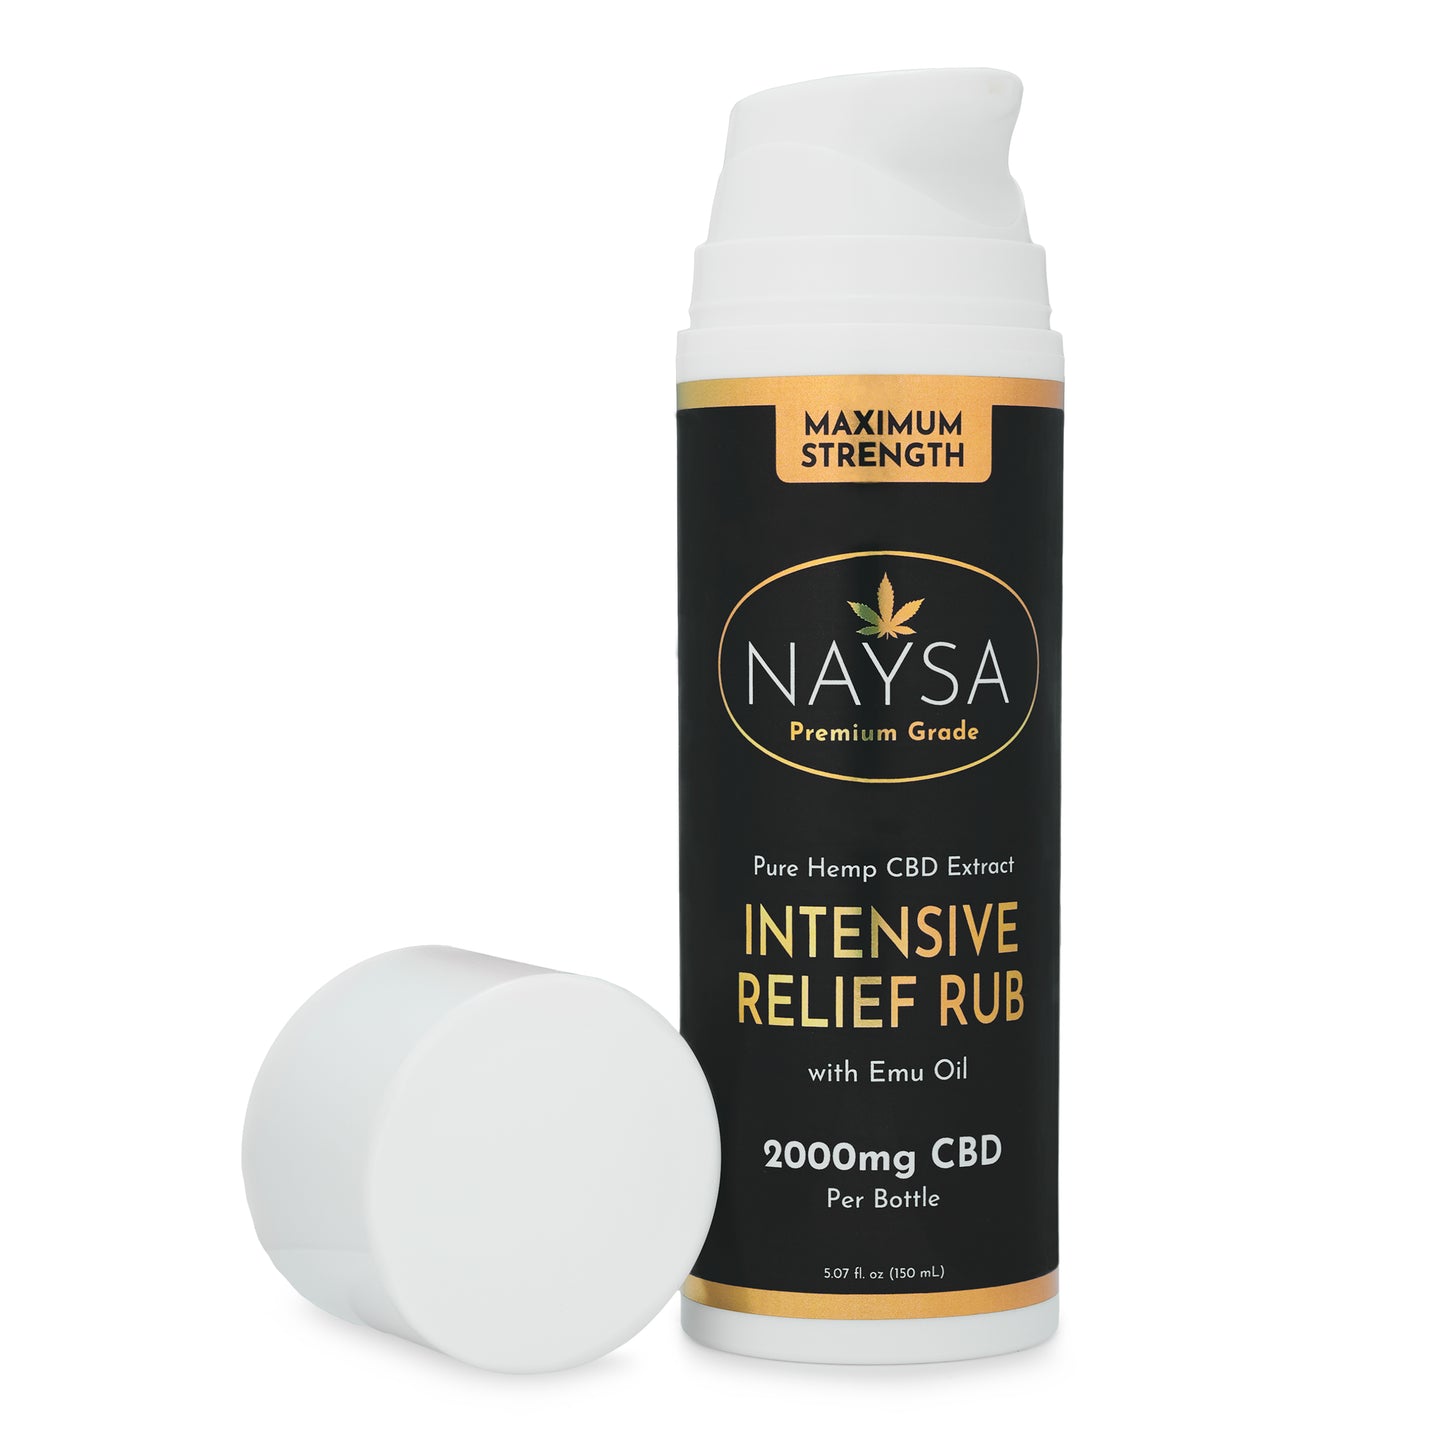 Naysa Intensive Relief Rub With Emu Oil